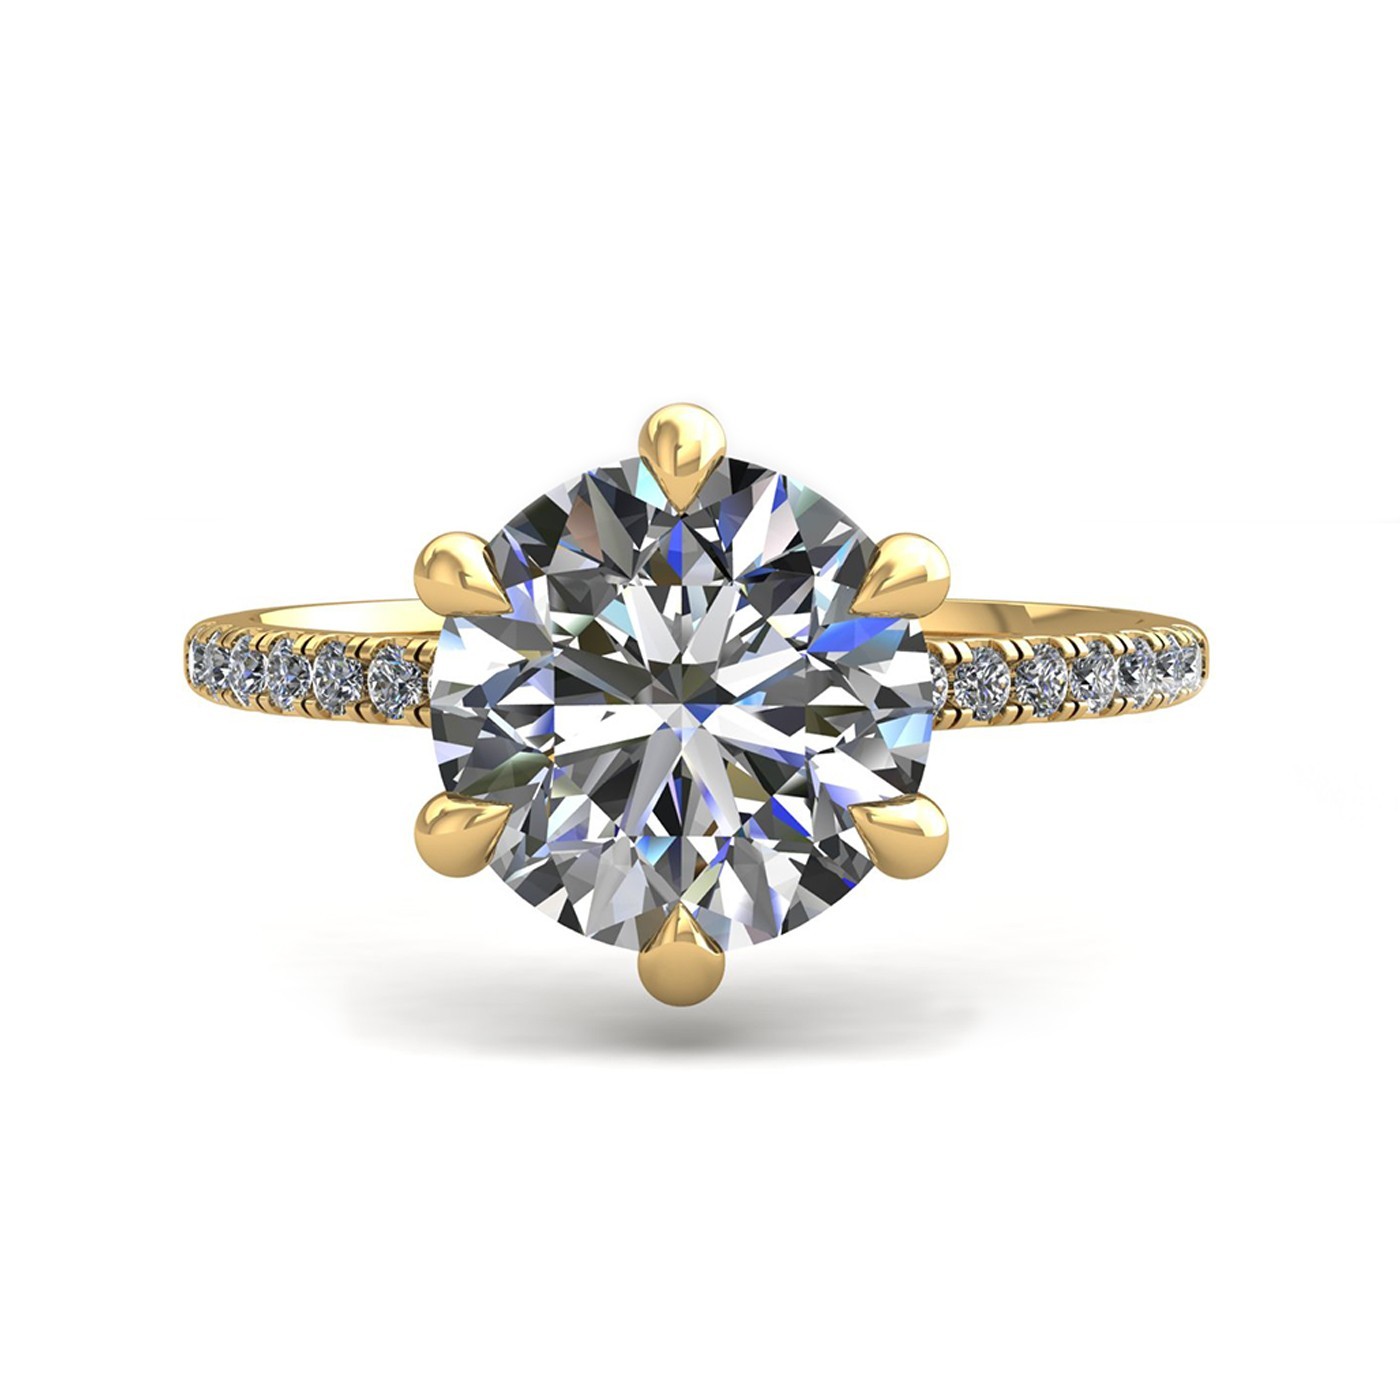 18k yellow gold 1,50 ct 6 prongs round cut diamond engagement ring with whisper thin pavÉ set band Photos & images